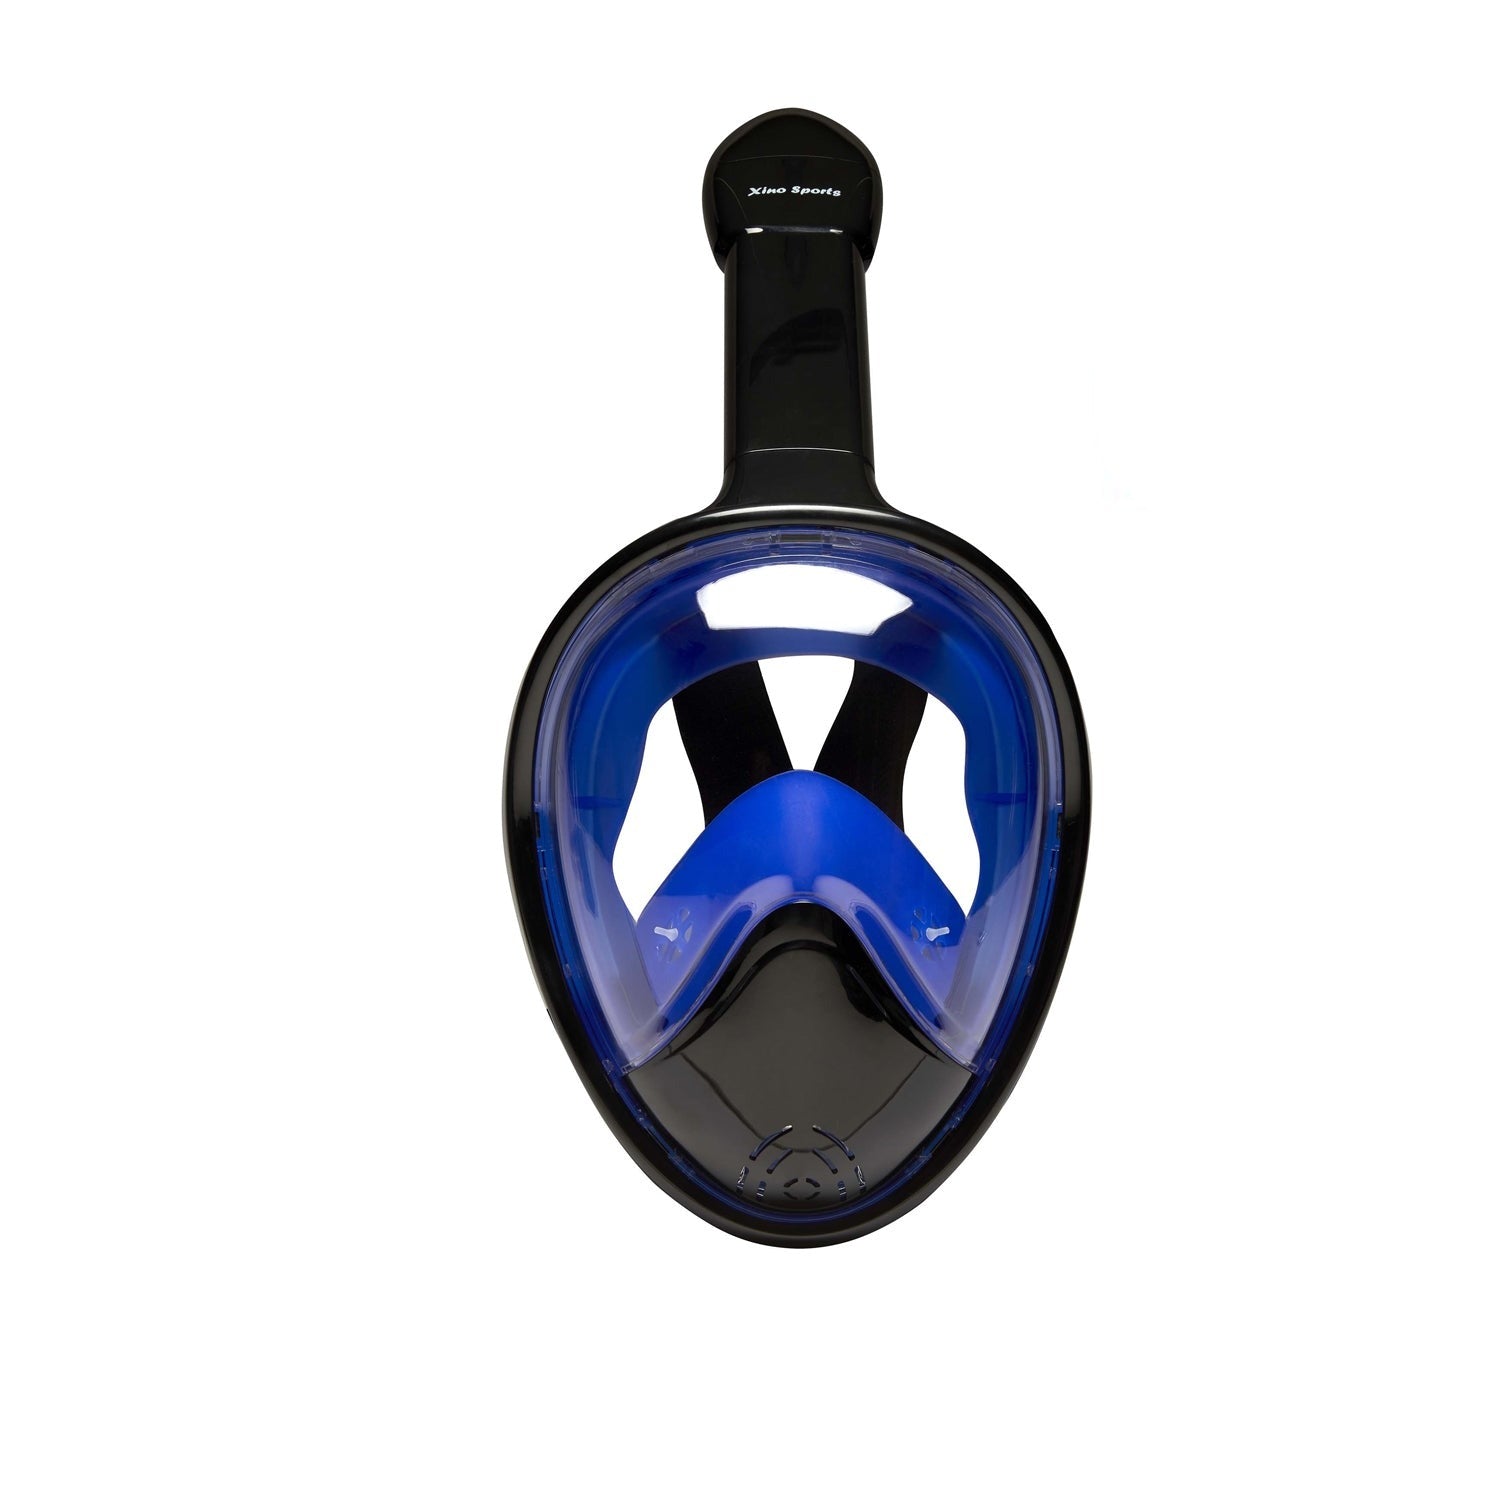 Snorkel Mask Panoramic Full Face Design for Adults and Youth Will Provide Hours of Fun, Xino Sports Diving Mask, Perfect View with Large Viewing Area - Xino Sports